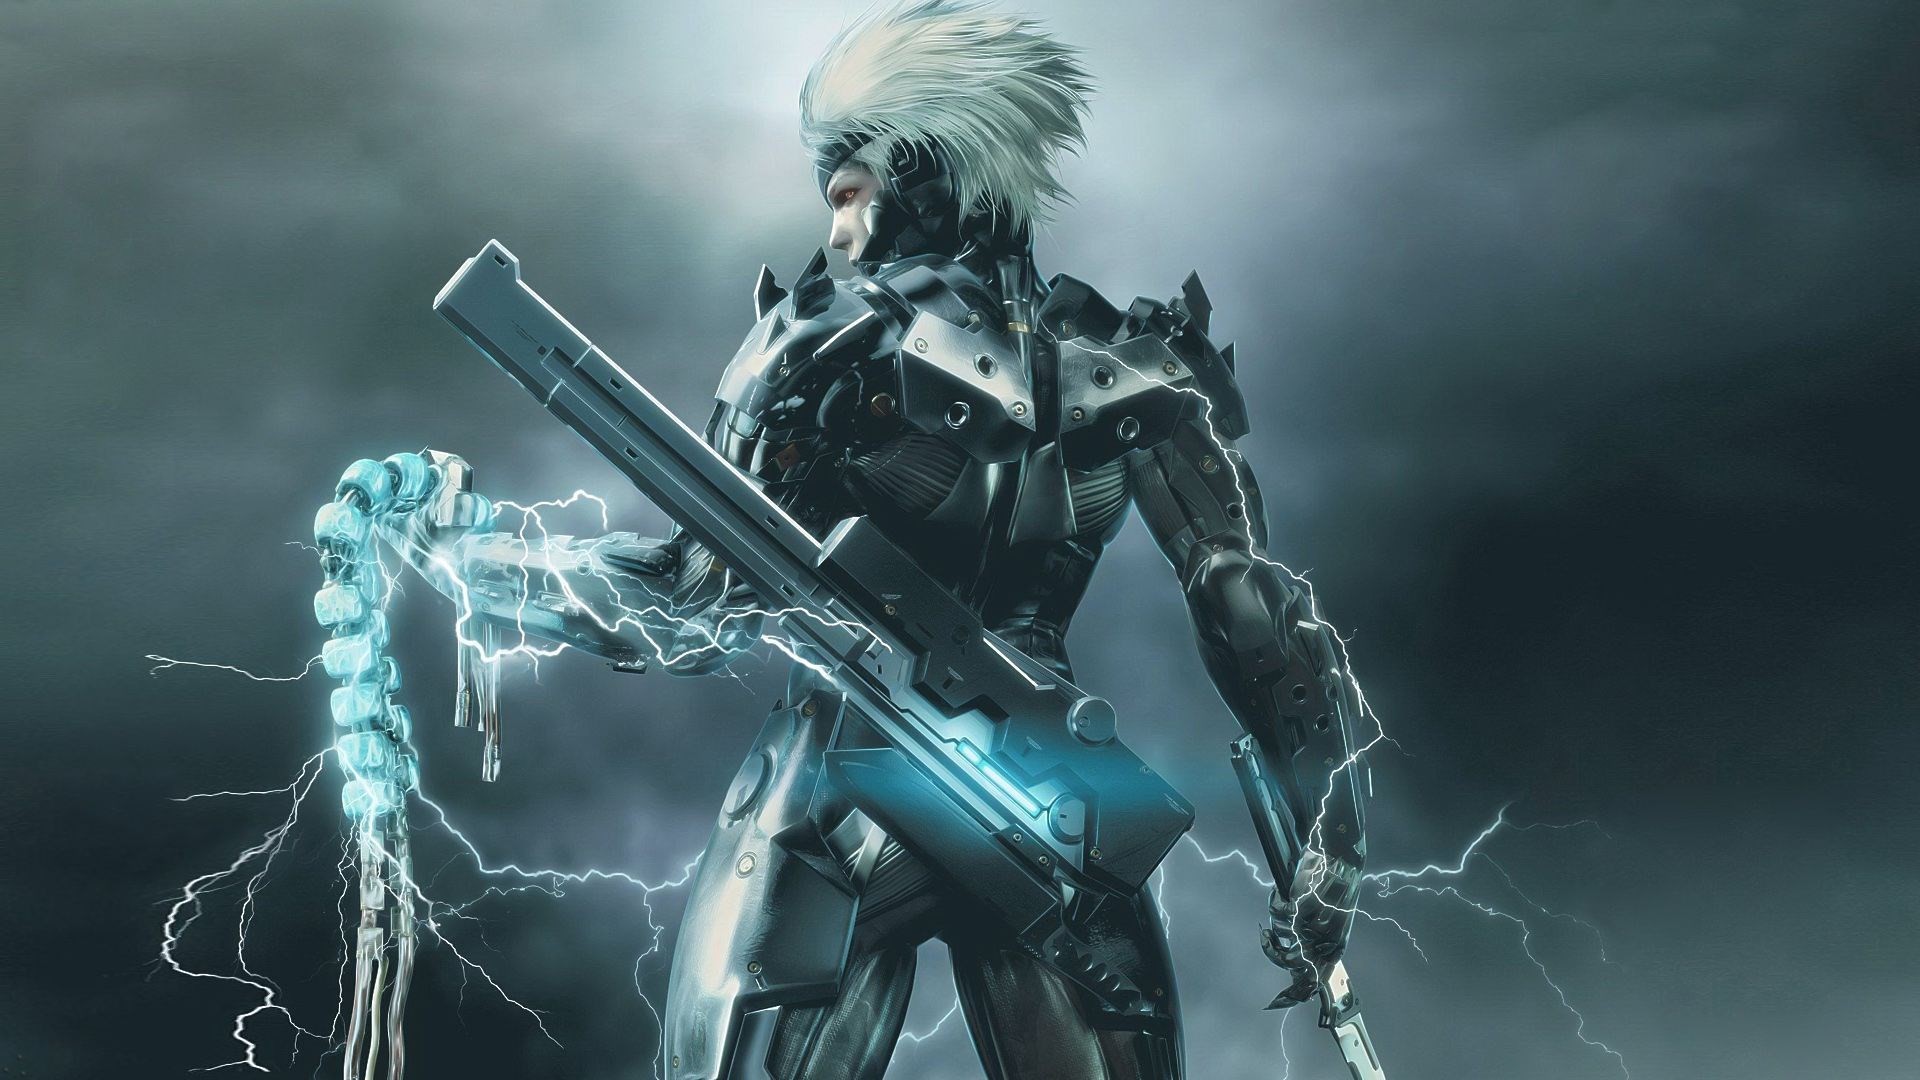 1920x1080 1920 x 1080 px free wallpaper and screensavers for raiden metal gear by  Brantley Round for